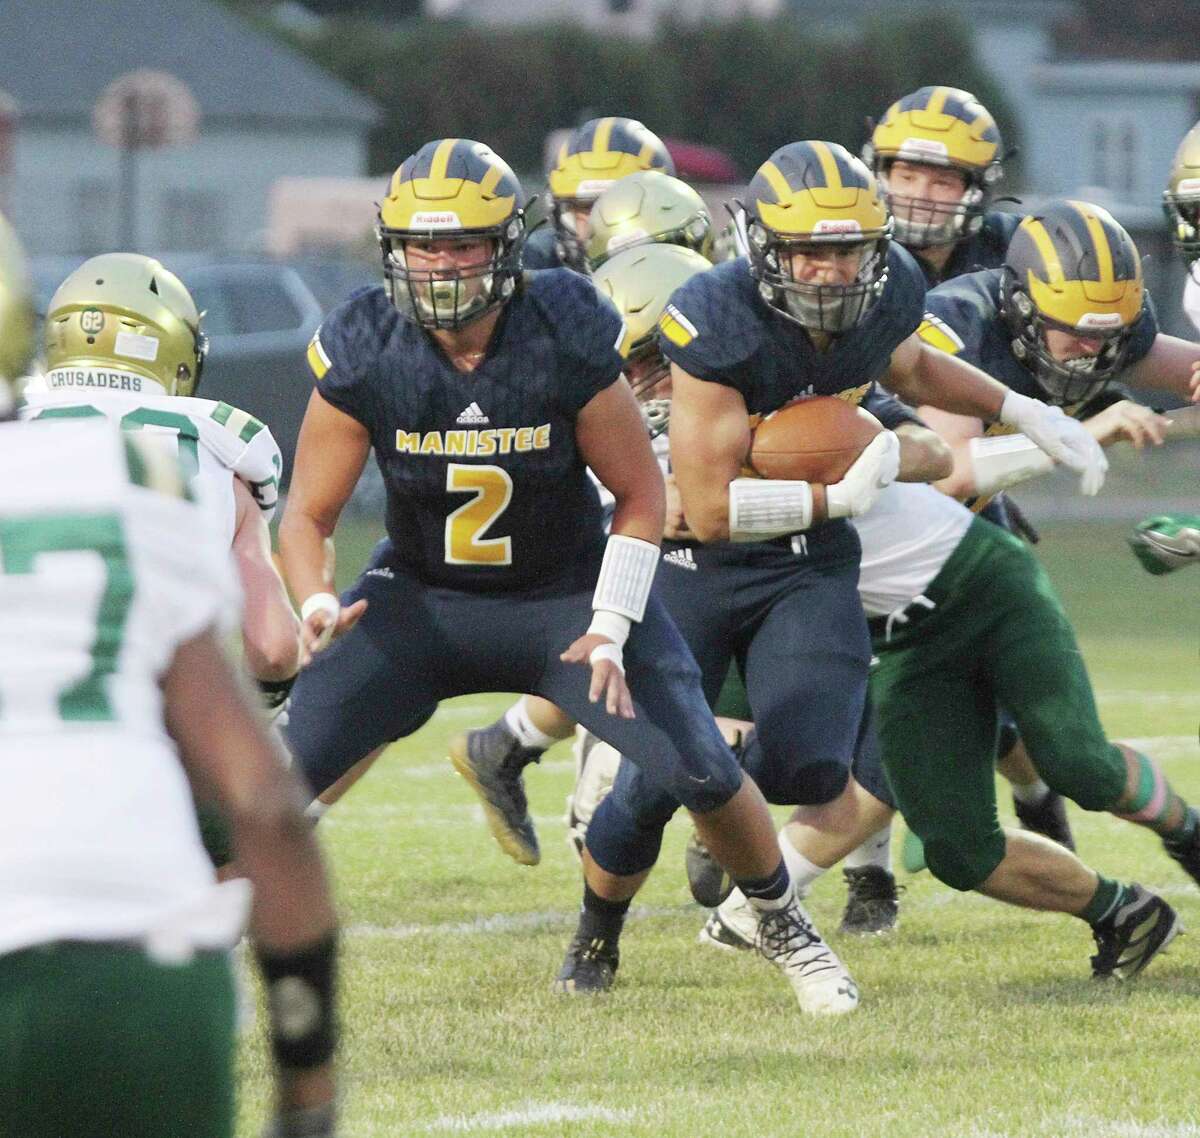 Manistee seniors Brady Mikula (left) and Laden Powers (right) were first-team selections on the all-Lakes 8 Conference list this season, Brady as a defensive lineman and Powers as an offensive skills position. (News Advocate file photo)